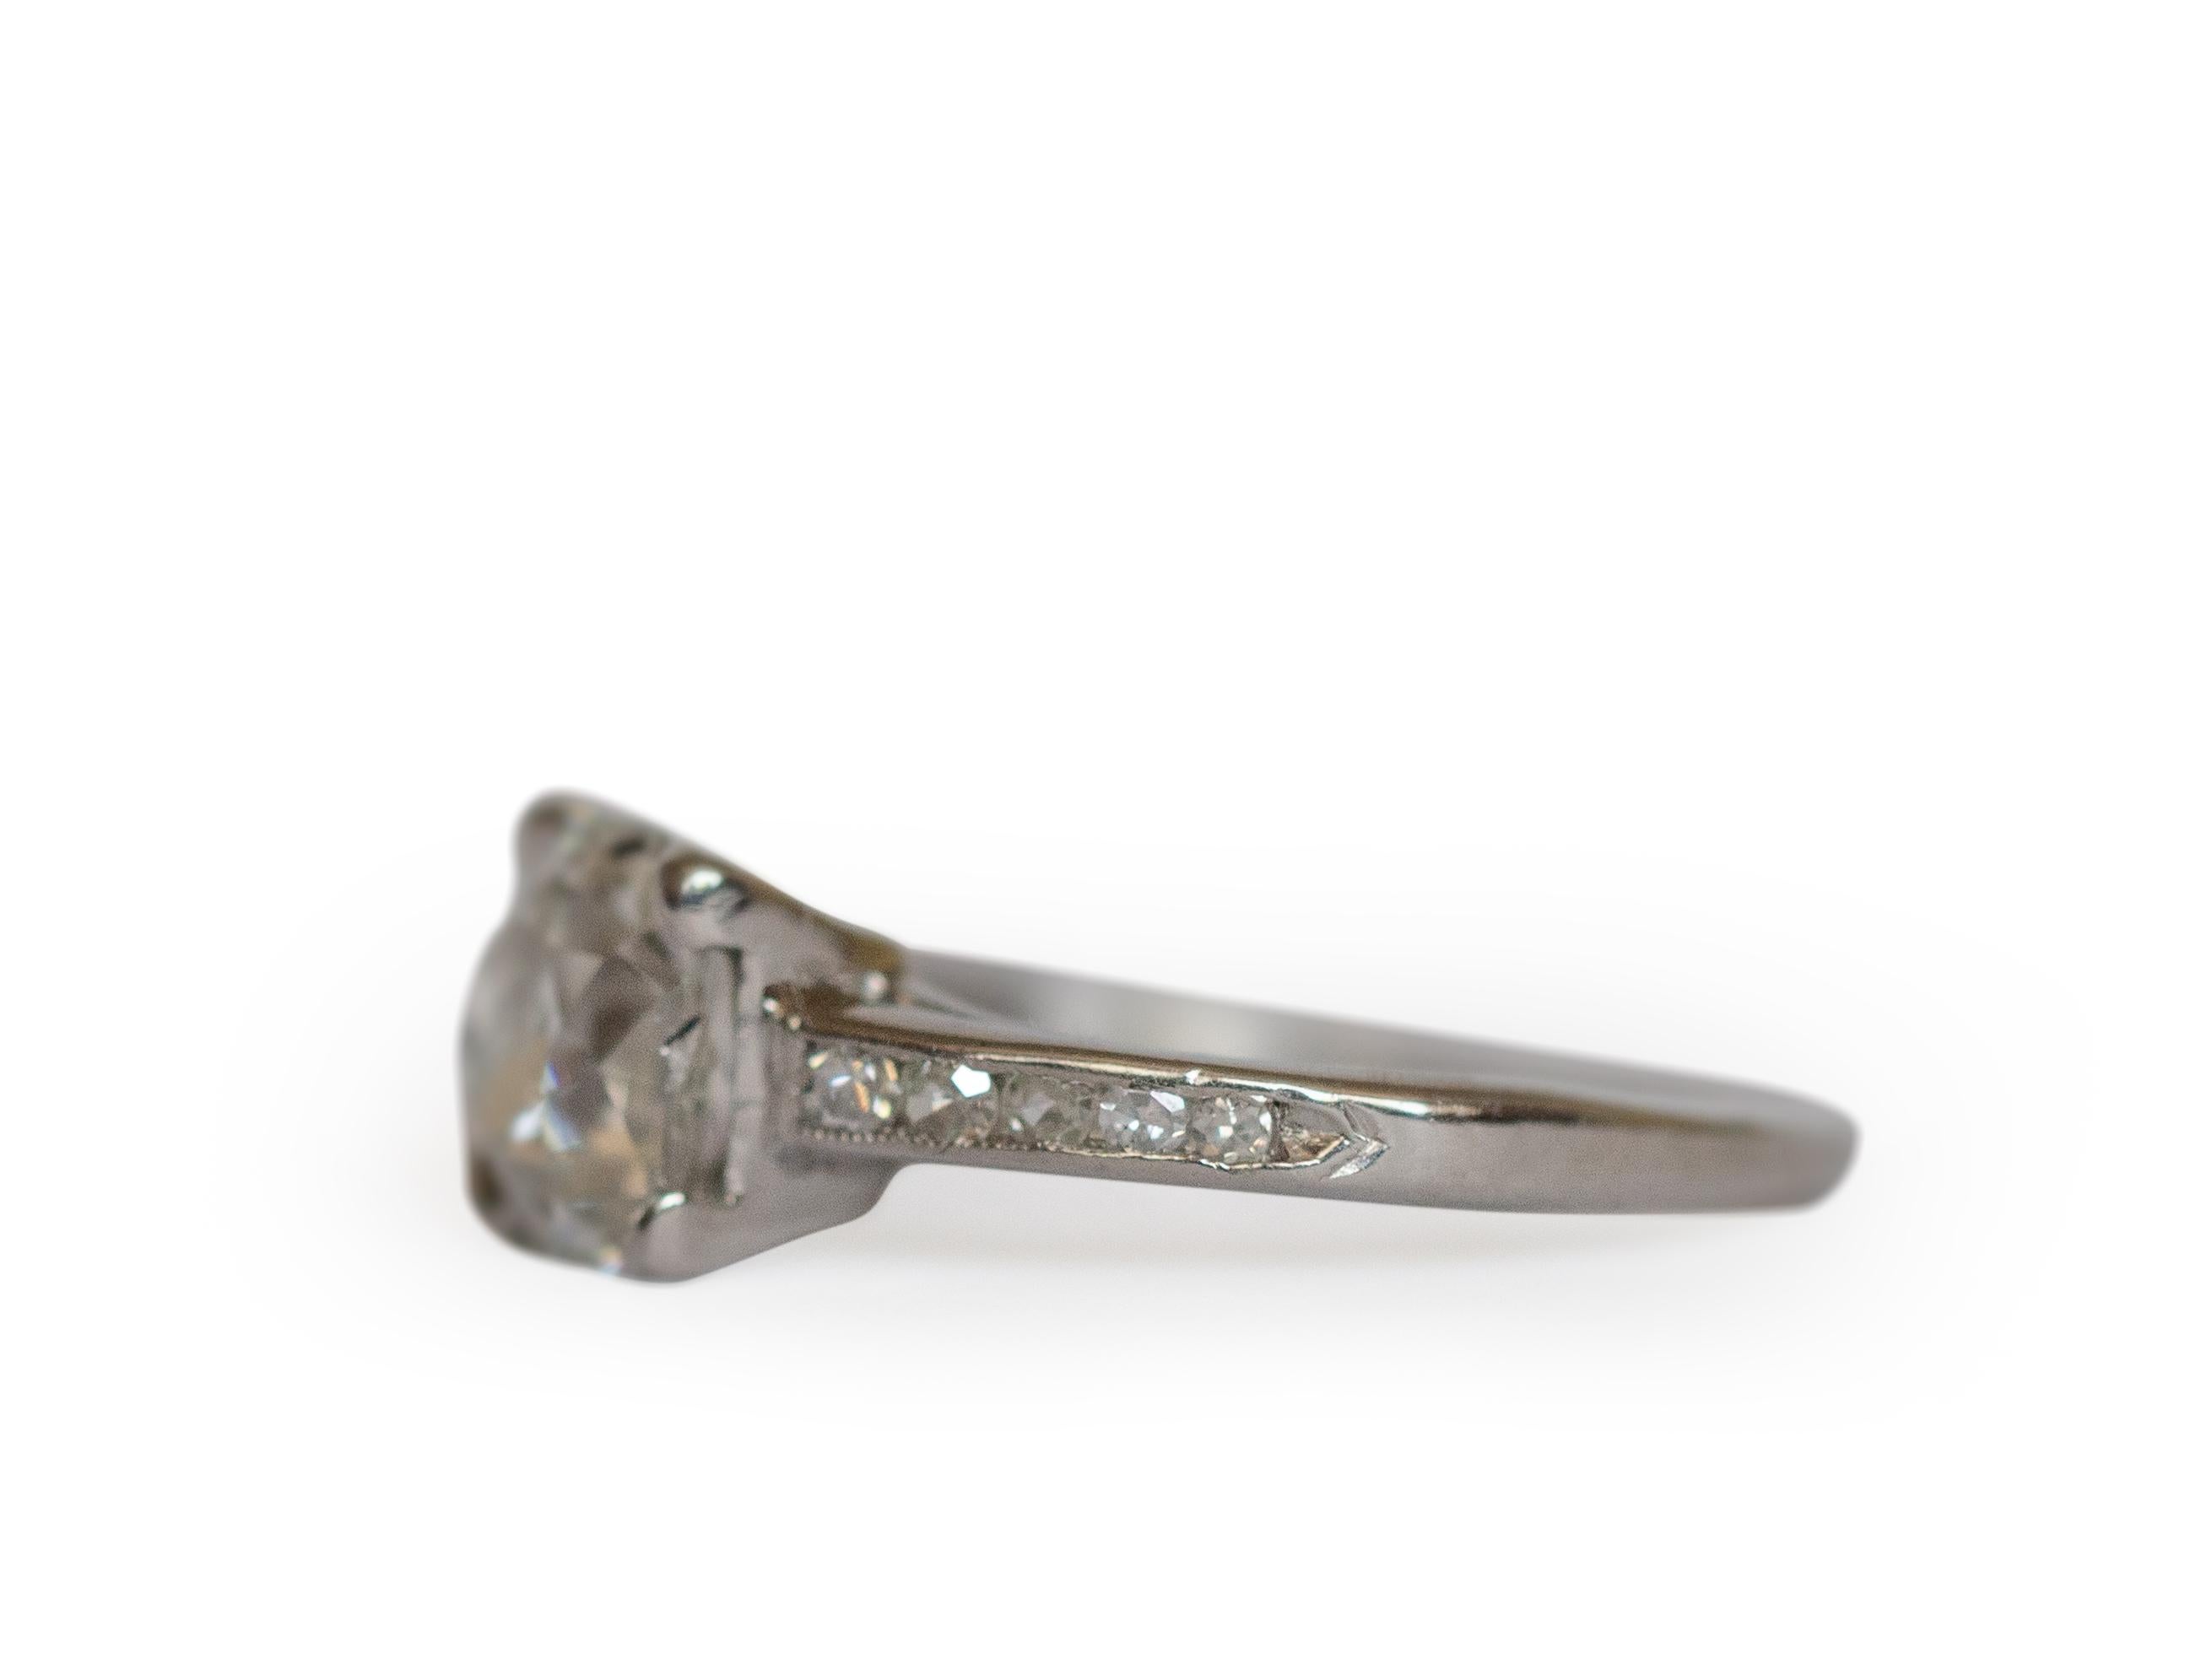 Ring Size: 6.5
Metal Type: Platinum  [Hallmarked, and Tested]
Weight:  3 grams

Center Diamond Details:
GIA REPORT #:1216110141
Weight: 1.13 carat
Cut: Antique Elongated Cushion - Old Mine Brilliant
Color: K 
Clarity: SI1

Side Diamond